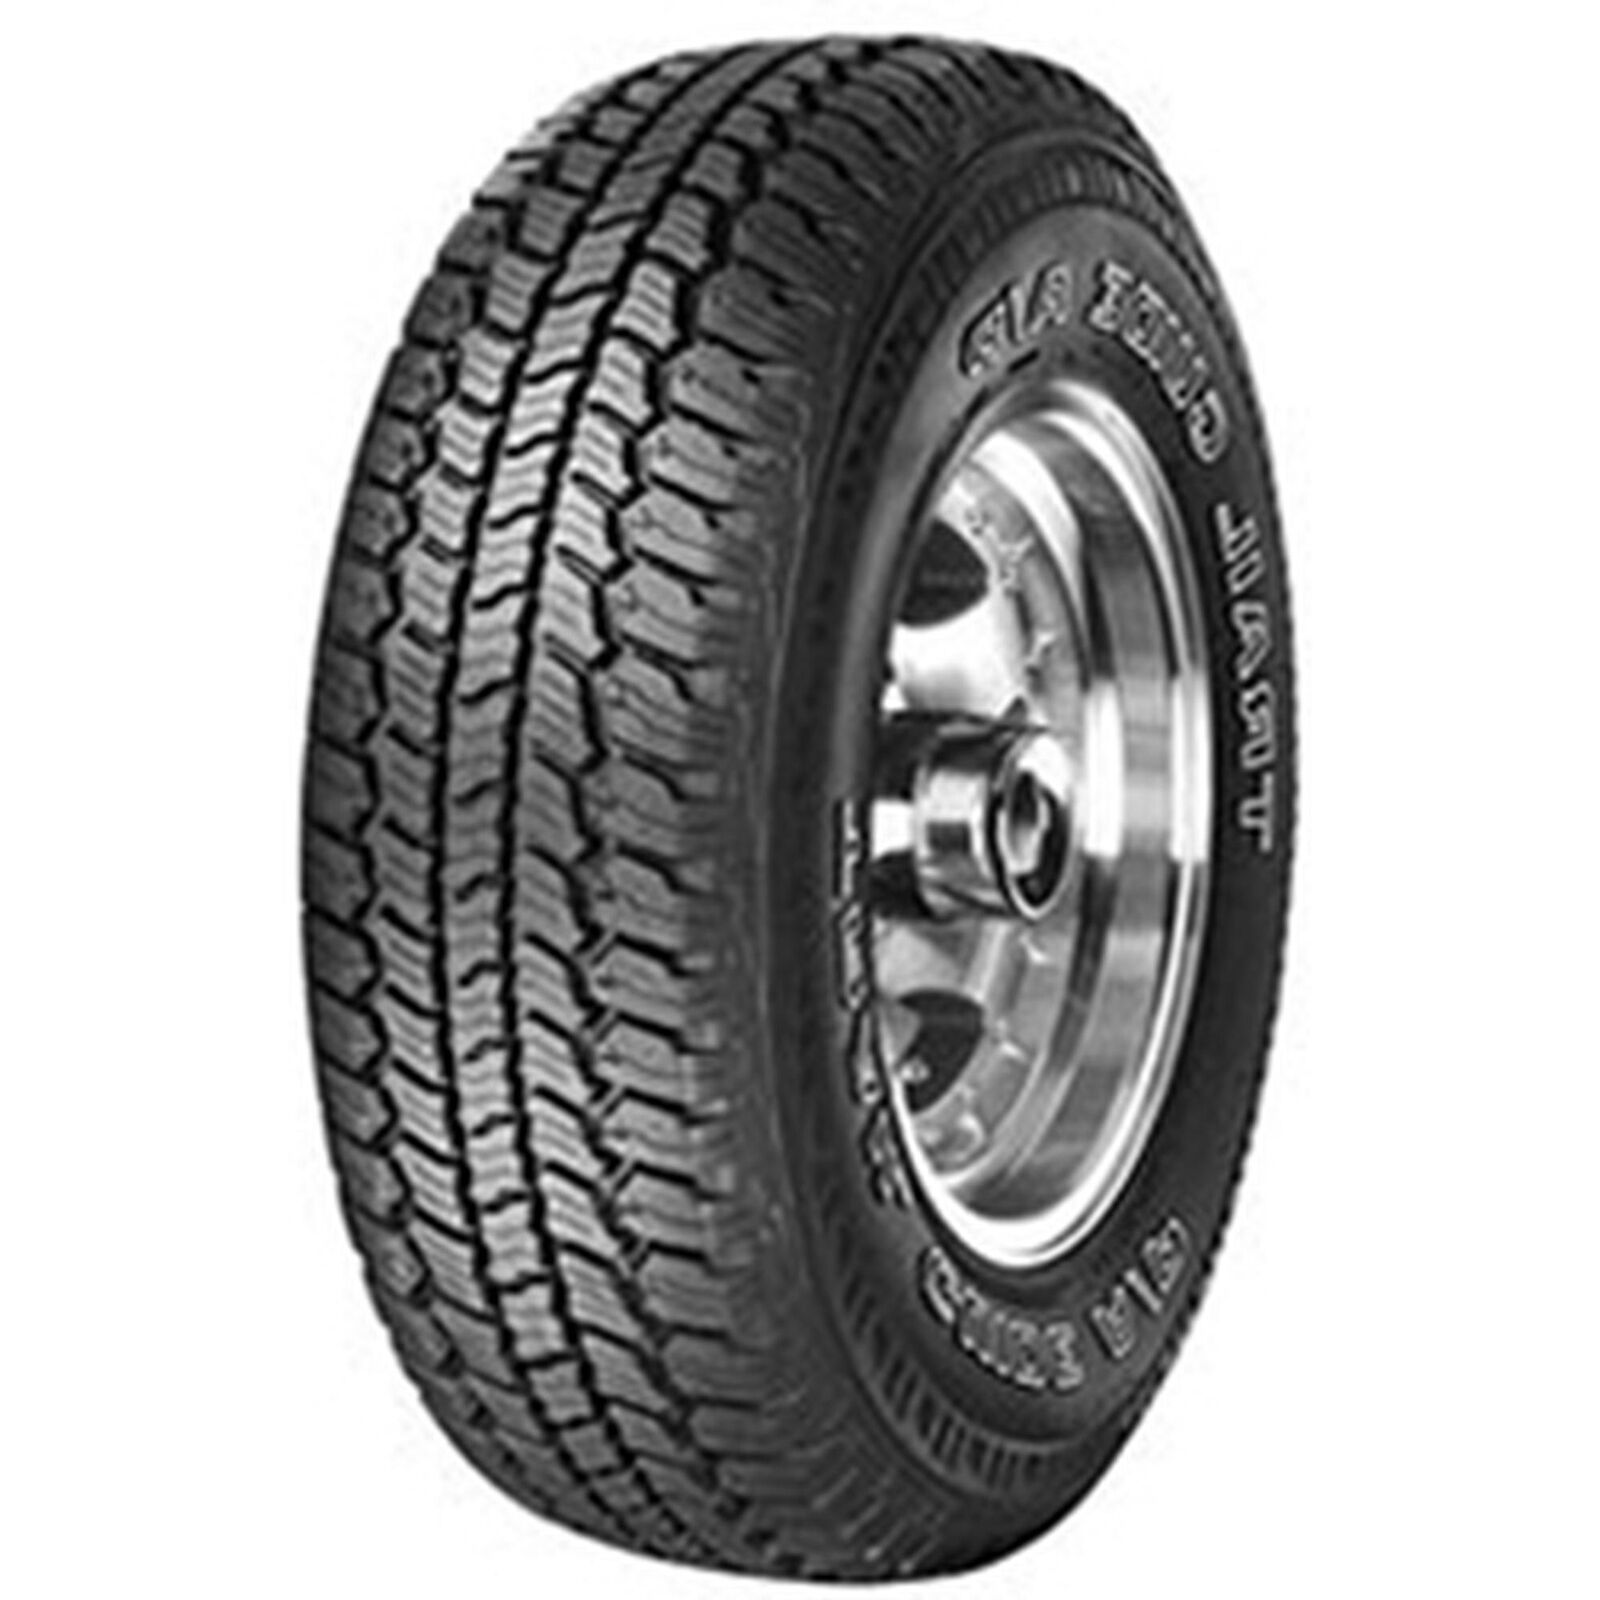 1 New Sigma Trail Guide A/t  - P265x70r16 Tires 2657016 265 70 16